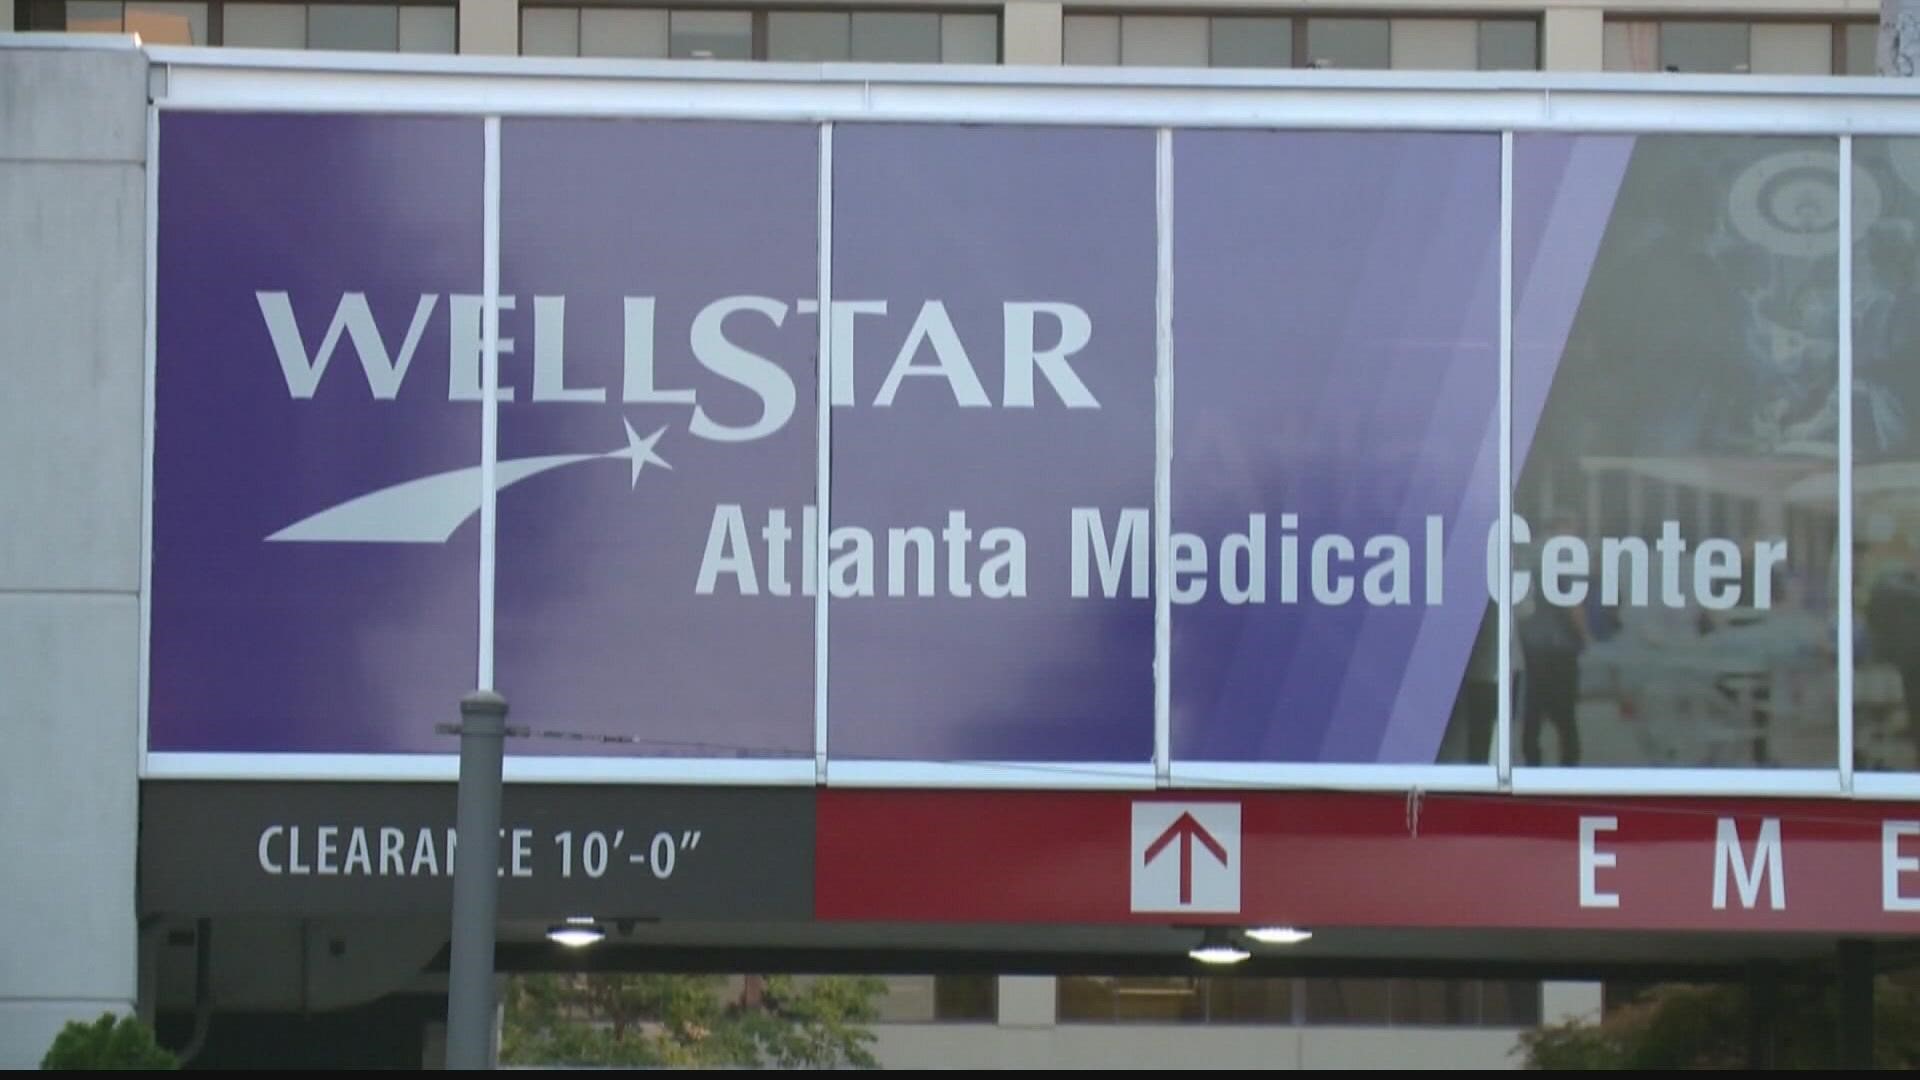 Georgia lawmakers announced last week they would file two federal complaints after Wellstar's closure of its East Point facility and Atlanta Medical Center.